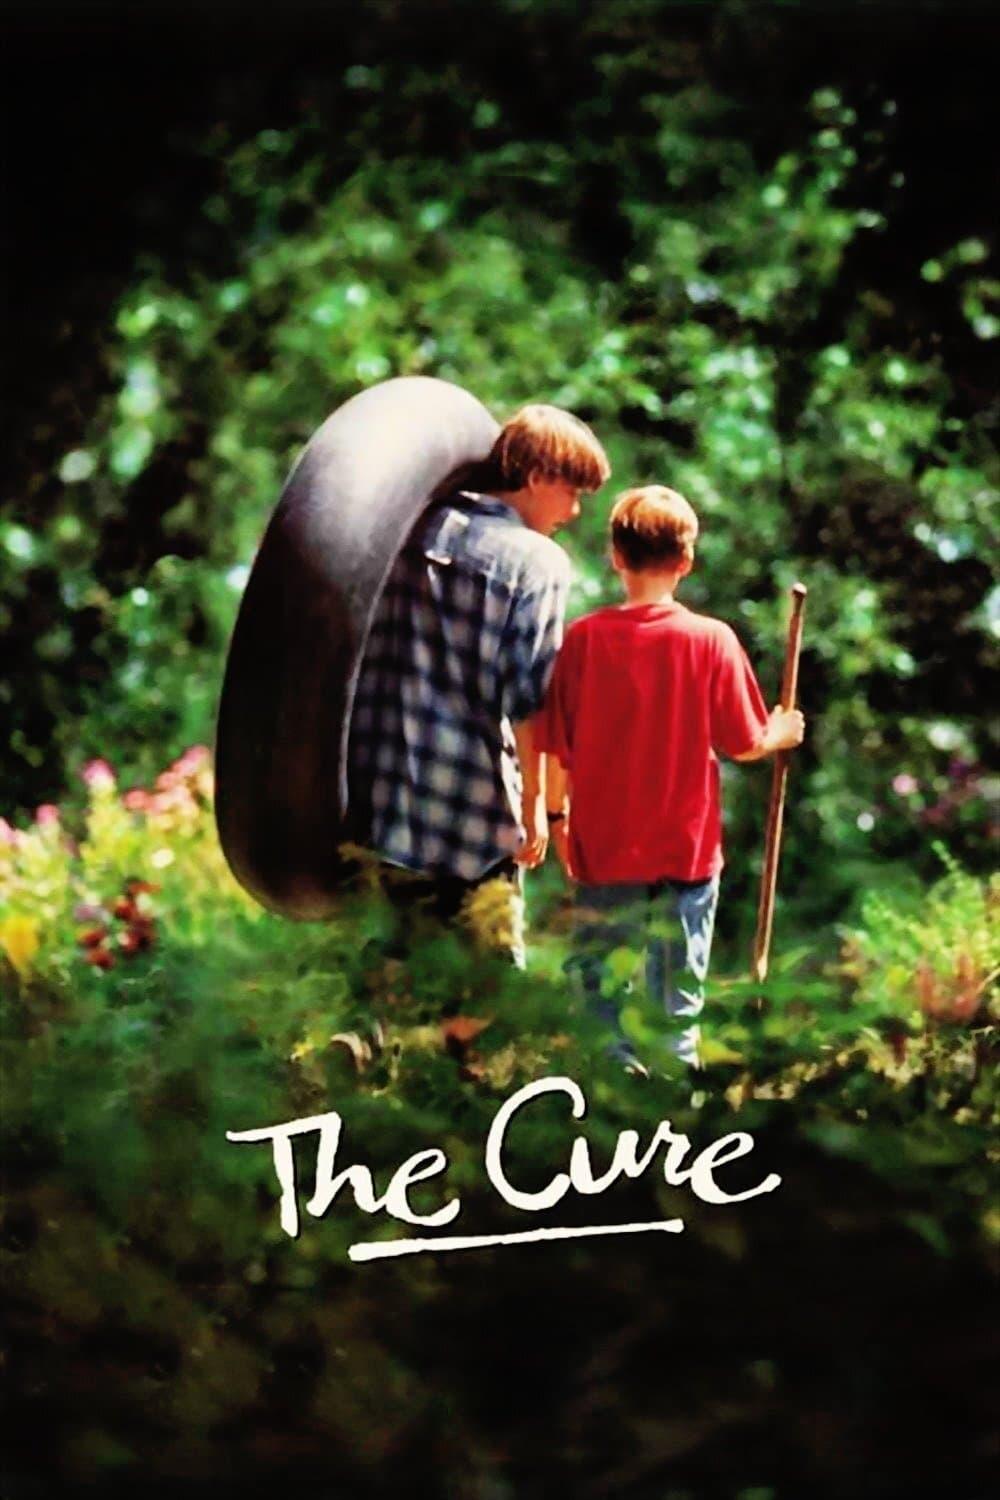 The Cure poster